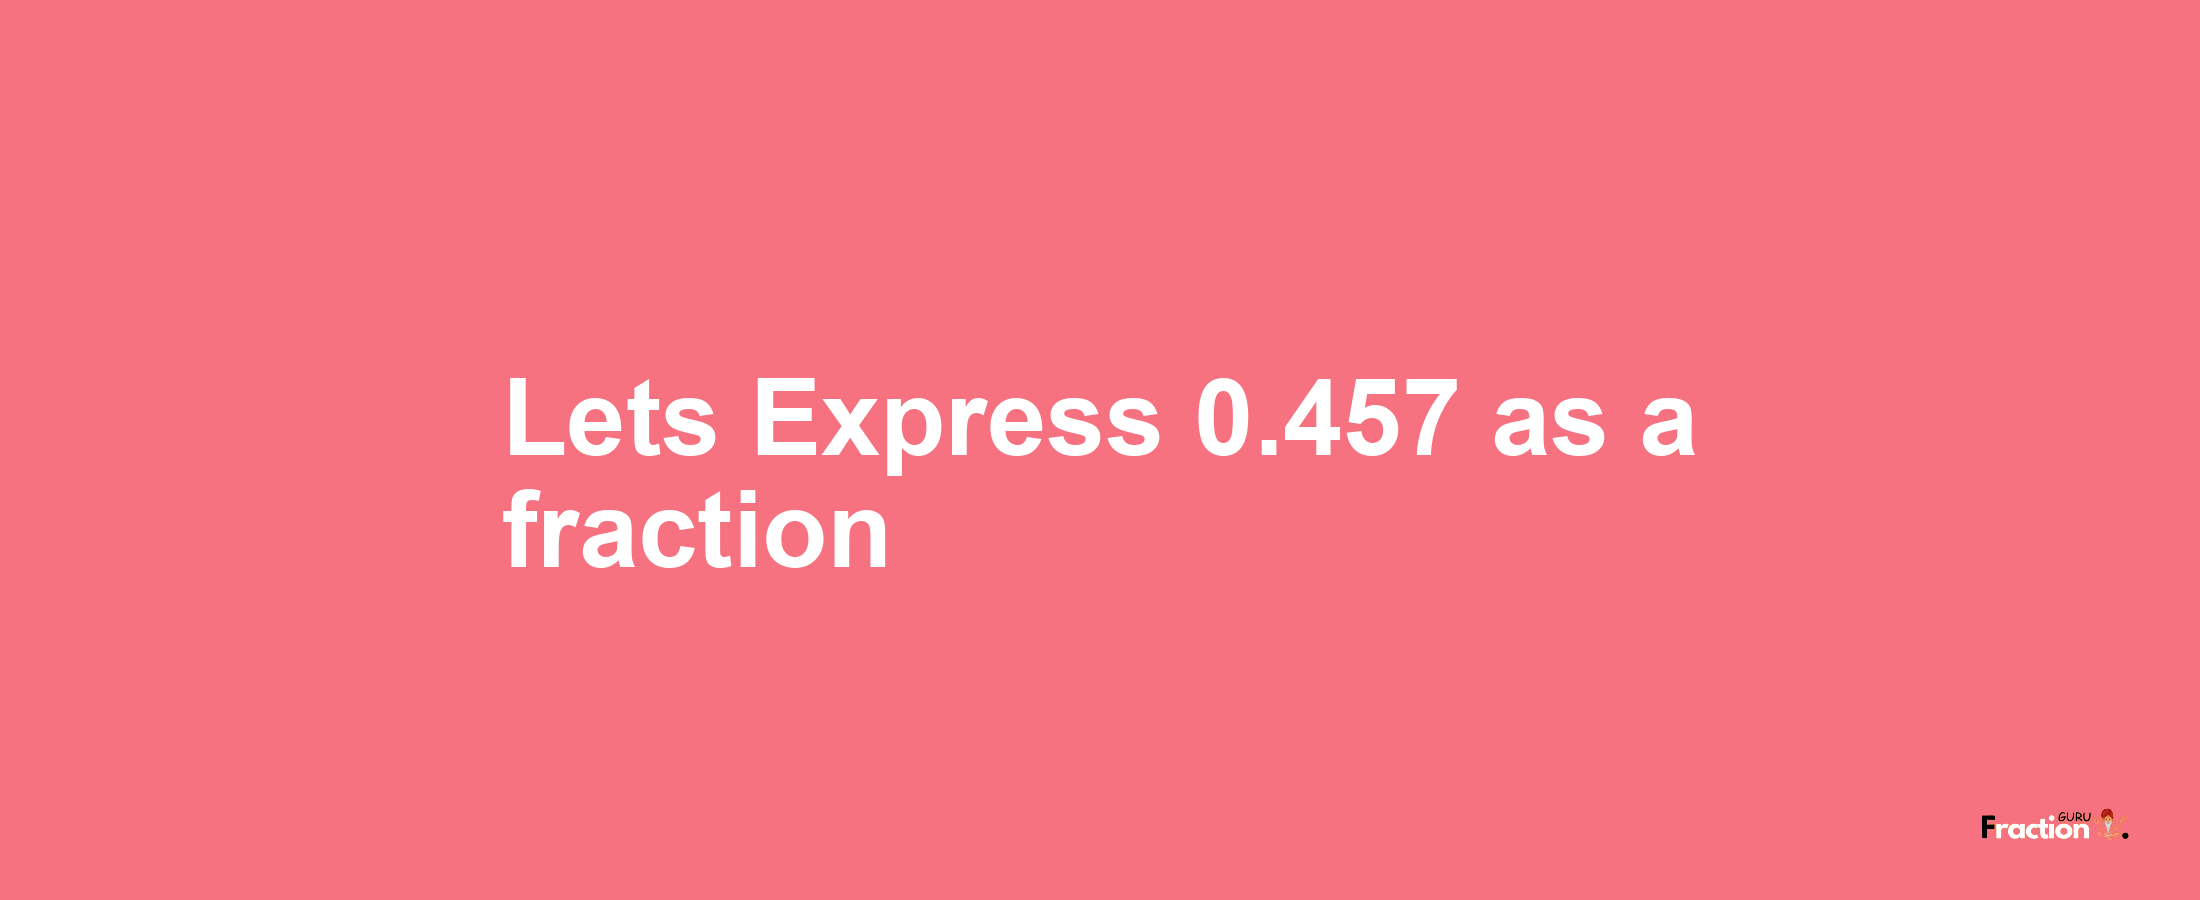 Lets Express 0.457 as afraction